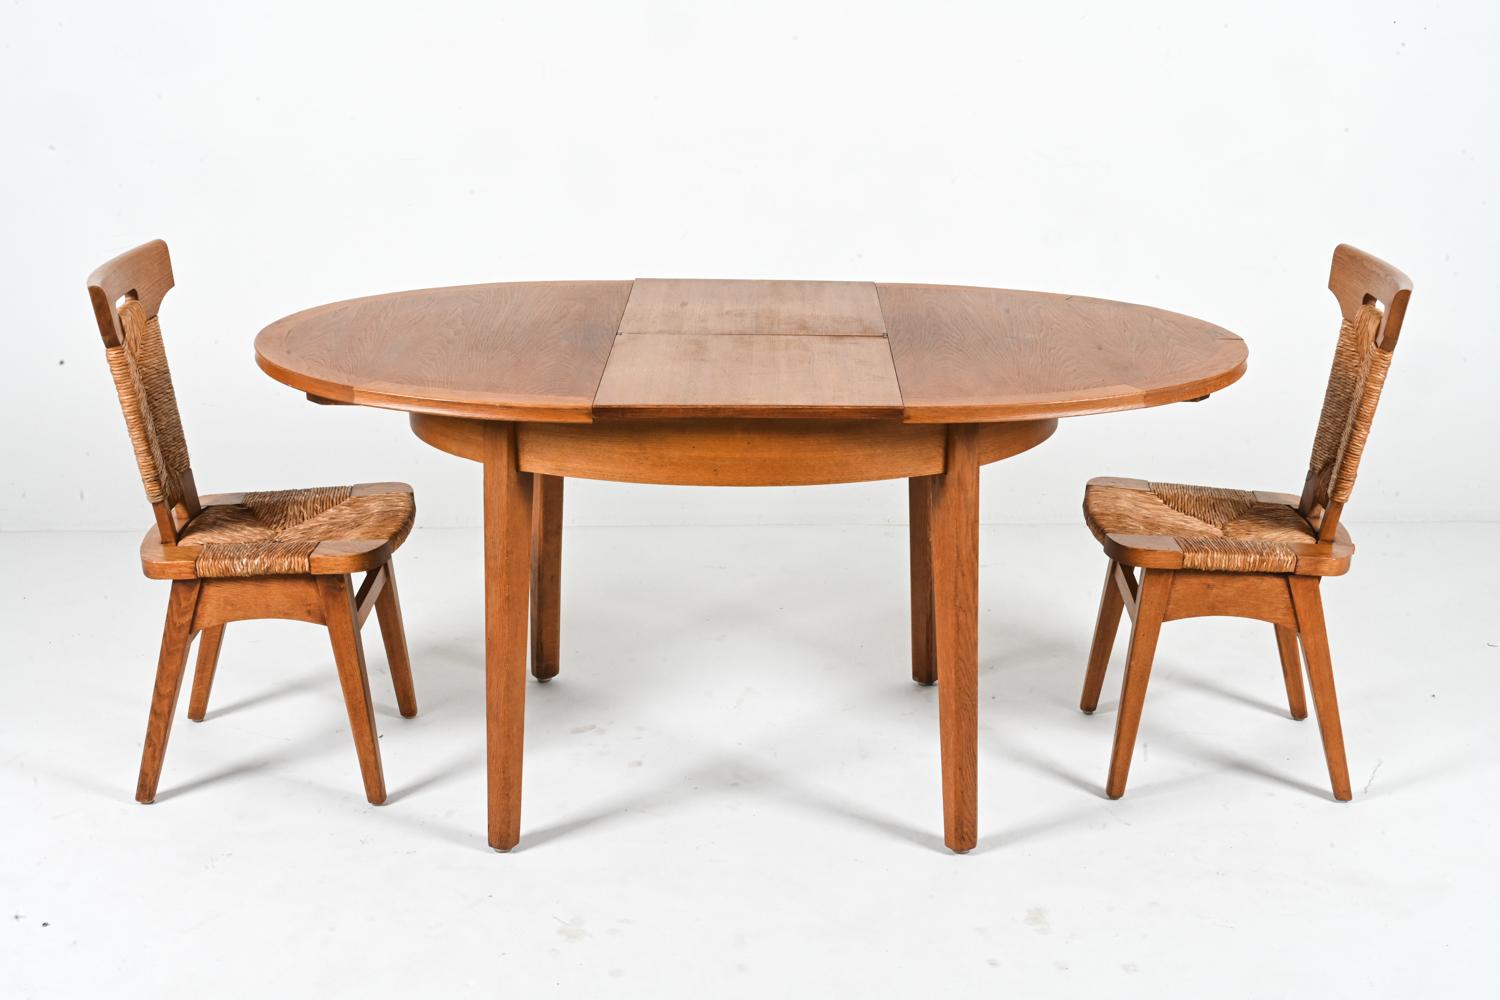 W. Kuyper Dutch Arts & Crafts Dining Suite in Oak & Rush, c. 1920s For Sale 12